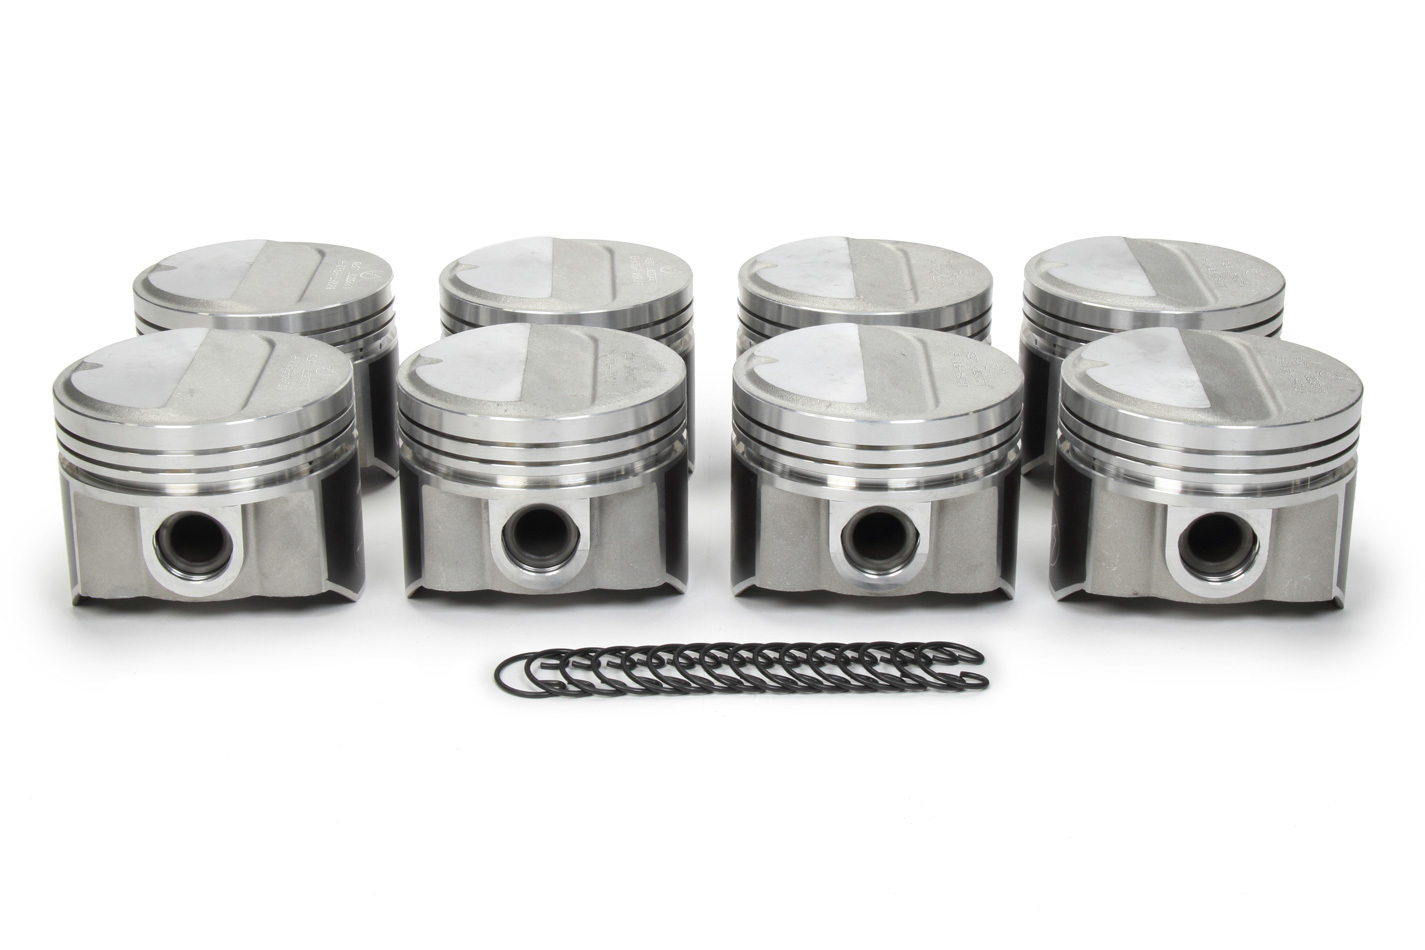 Sealed Power L2295AF30 Piston, Speed Pro, Forged, 4.350 in Bore, 1/16 x 1/16 x 3/16 in Ring Grooves, Plus 12.10 cc, Coated Skirt, Mopar RB-Series, Set of 8